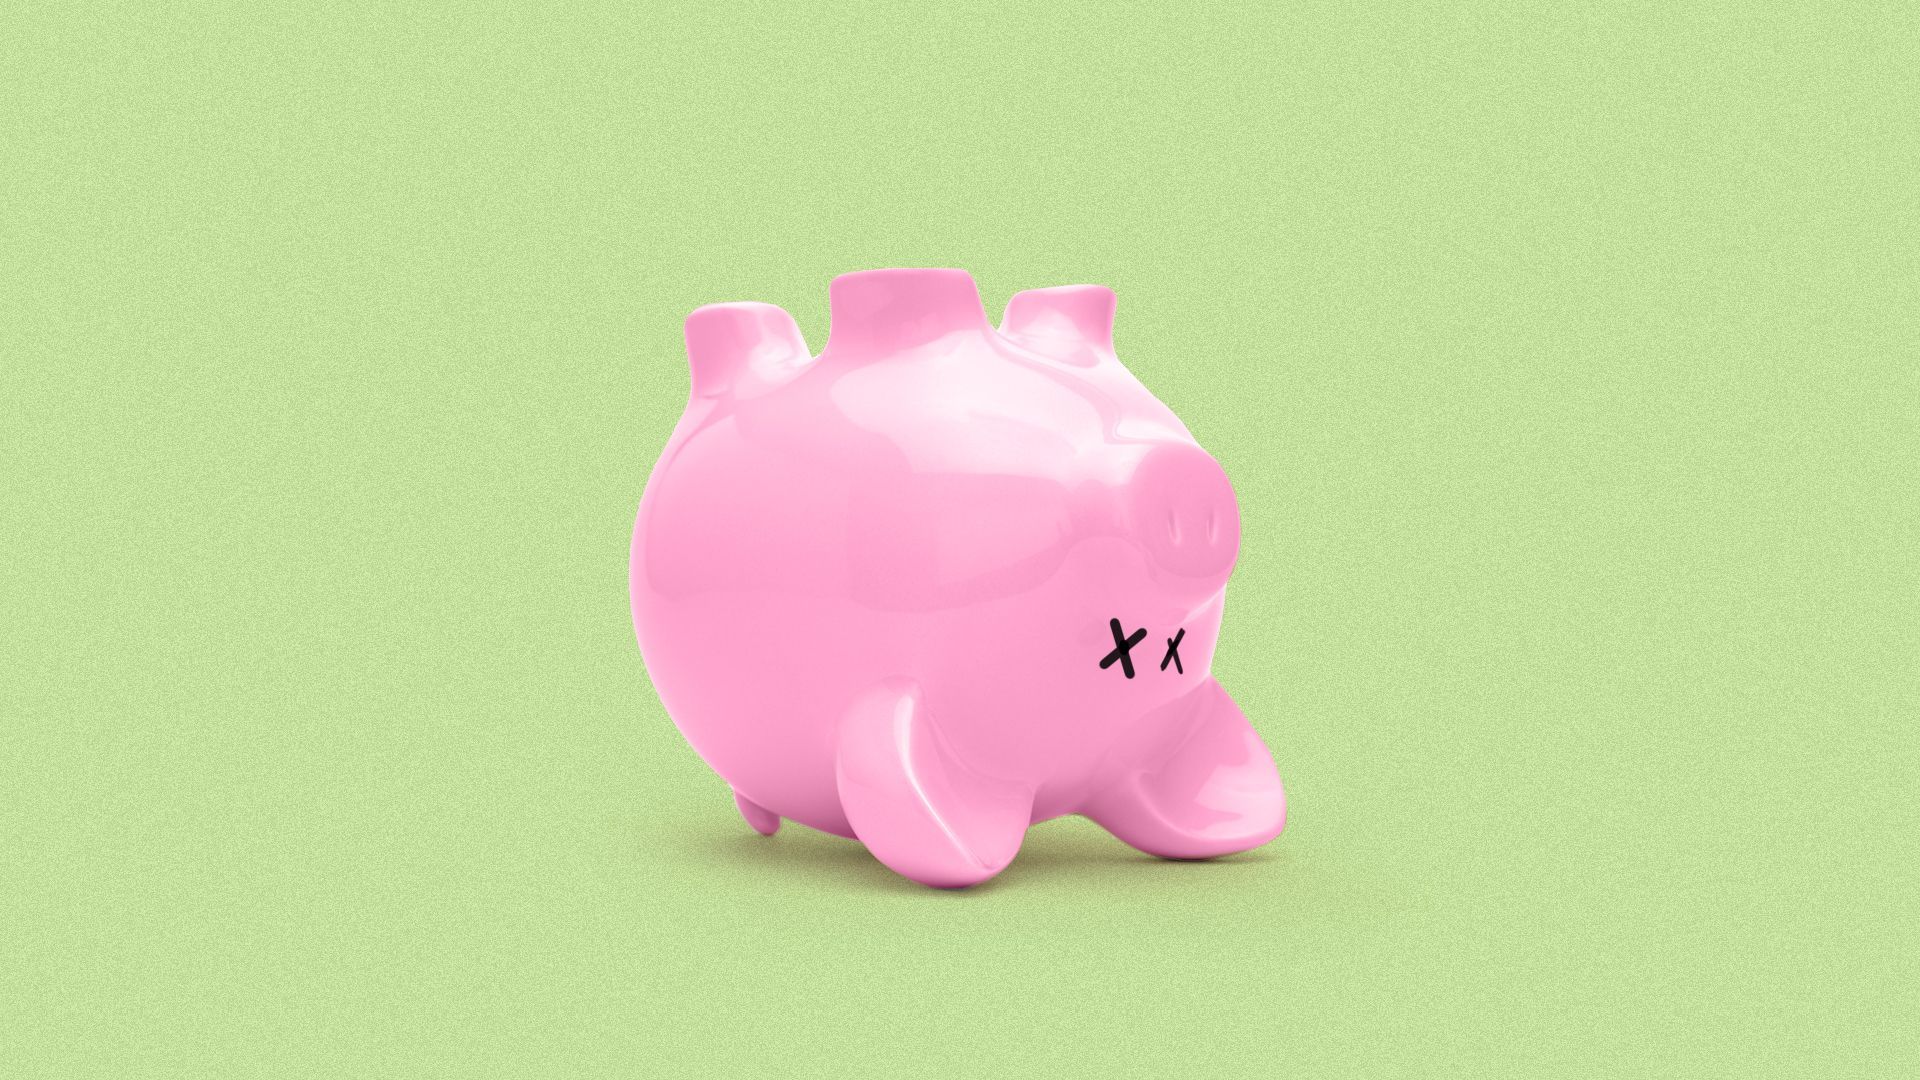 Illustration of a piggy bank on its back with X's for eyes